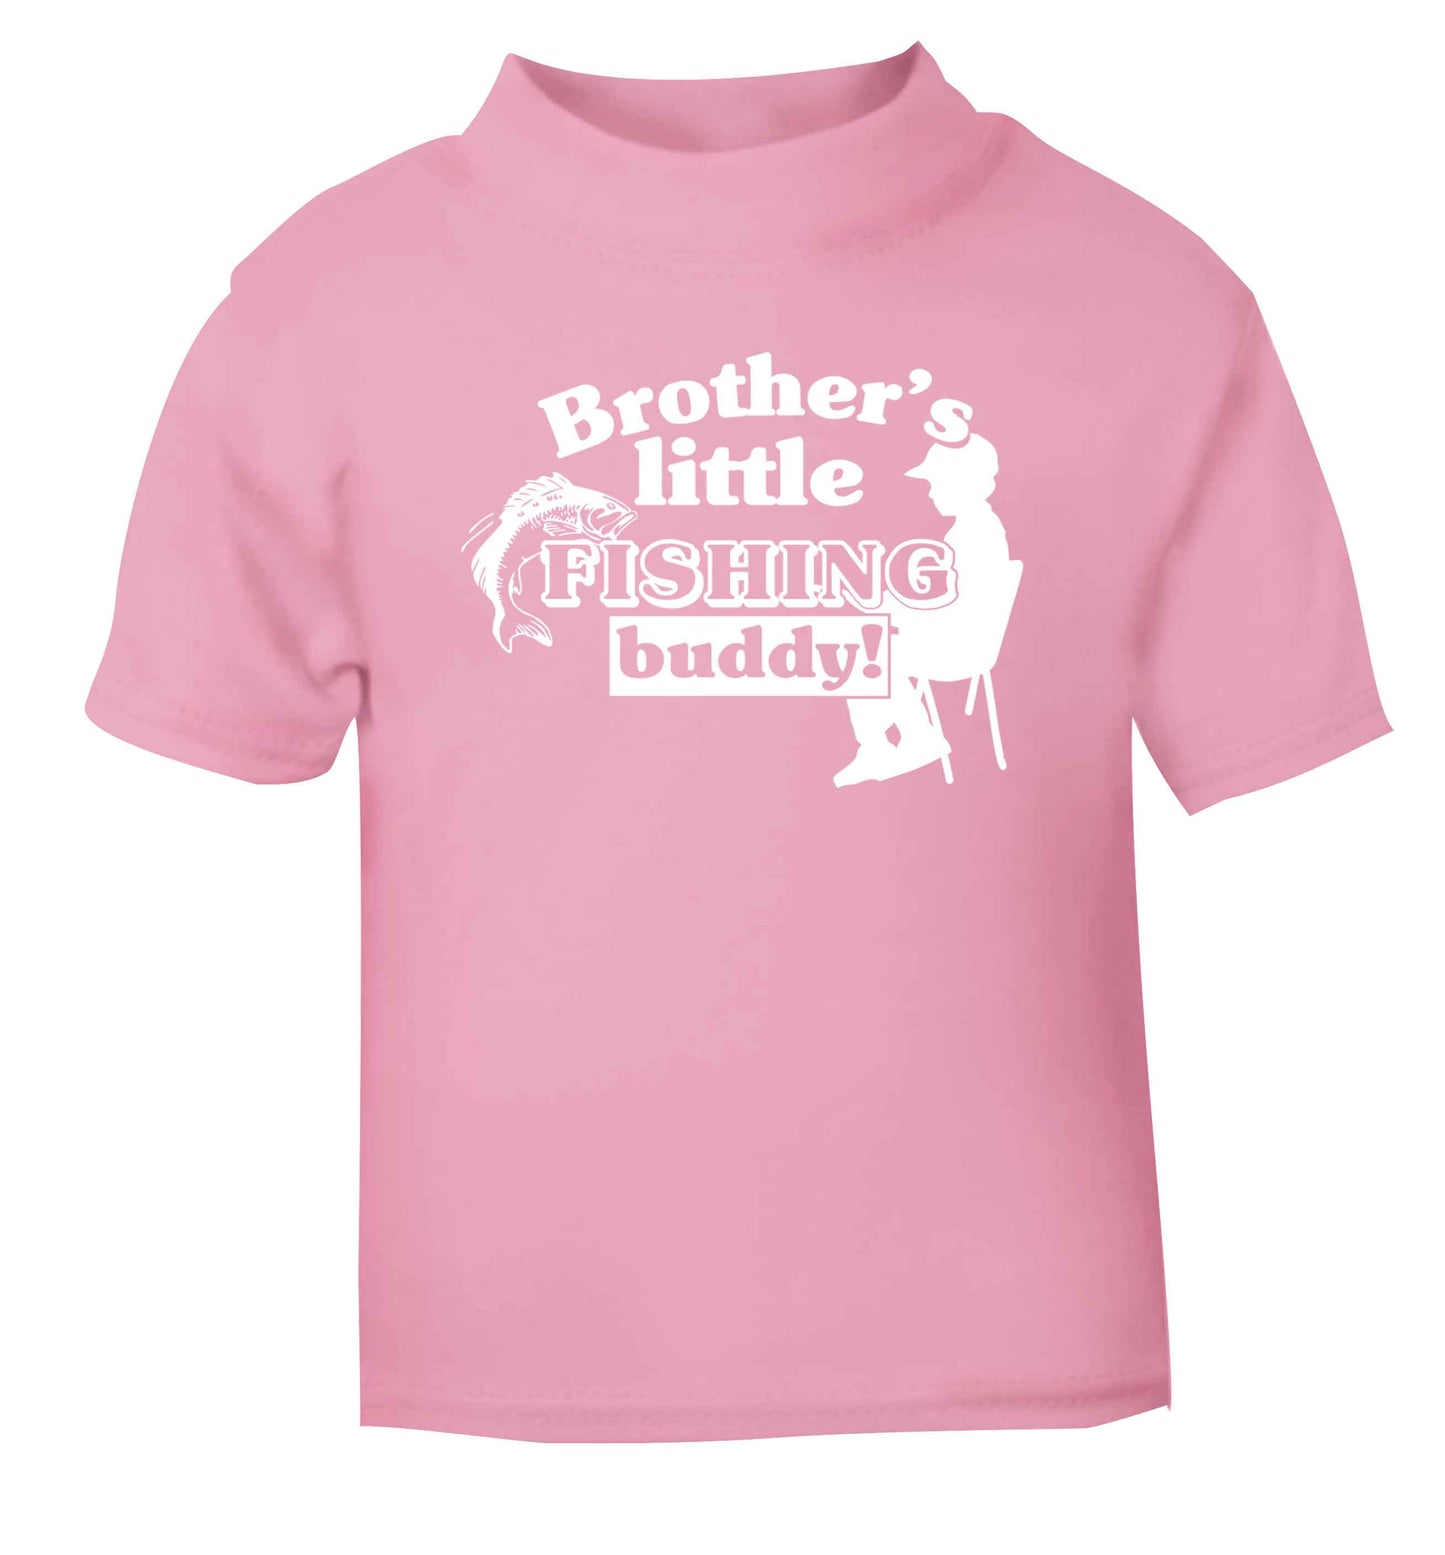 Brother's little fishing buddy light pink Baby Toddler Tshirt 2 Years